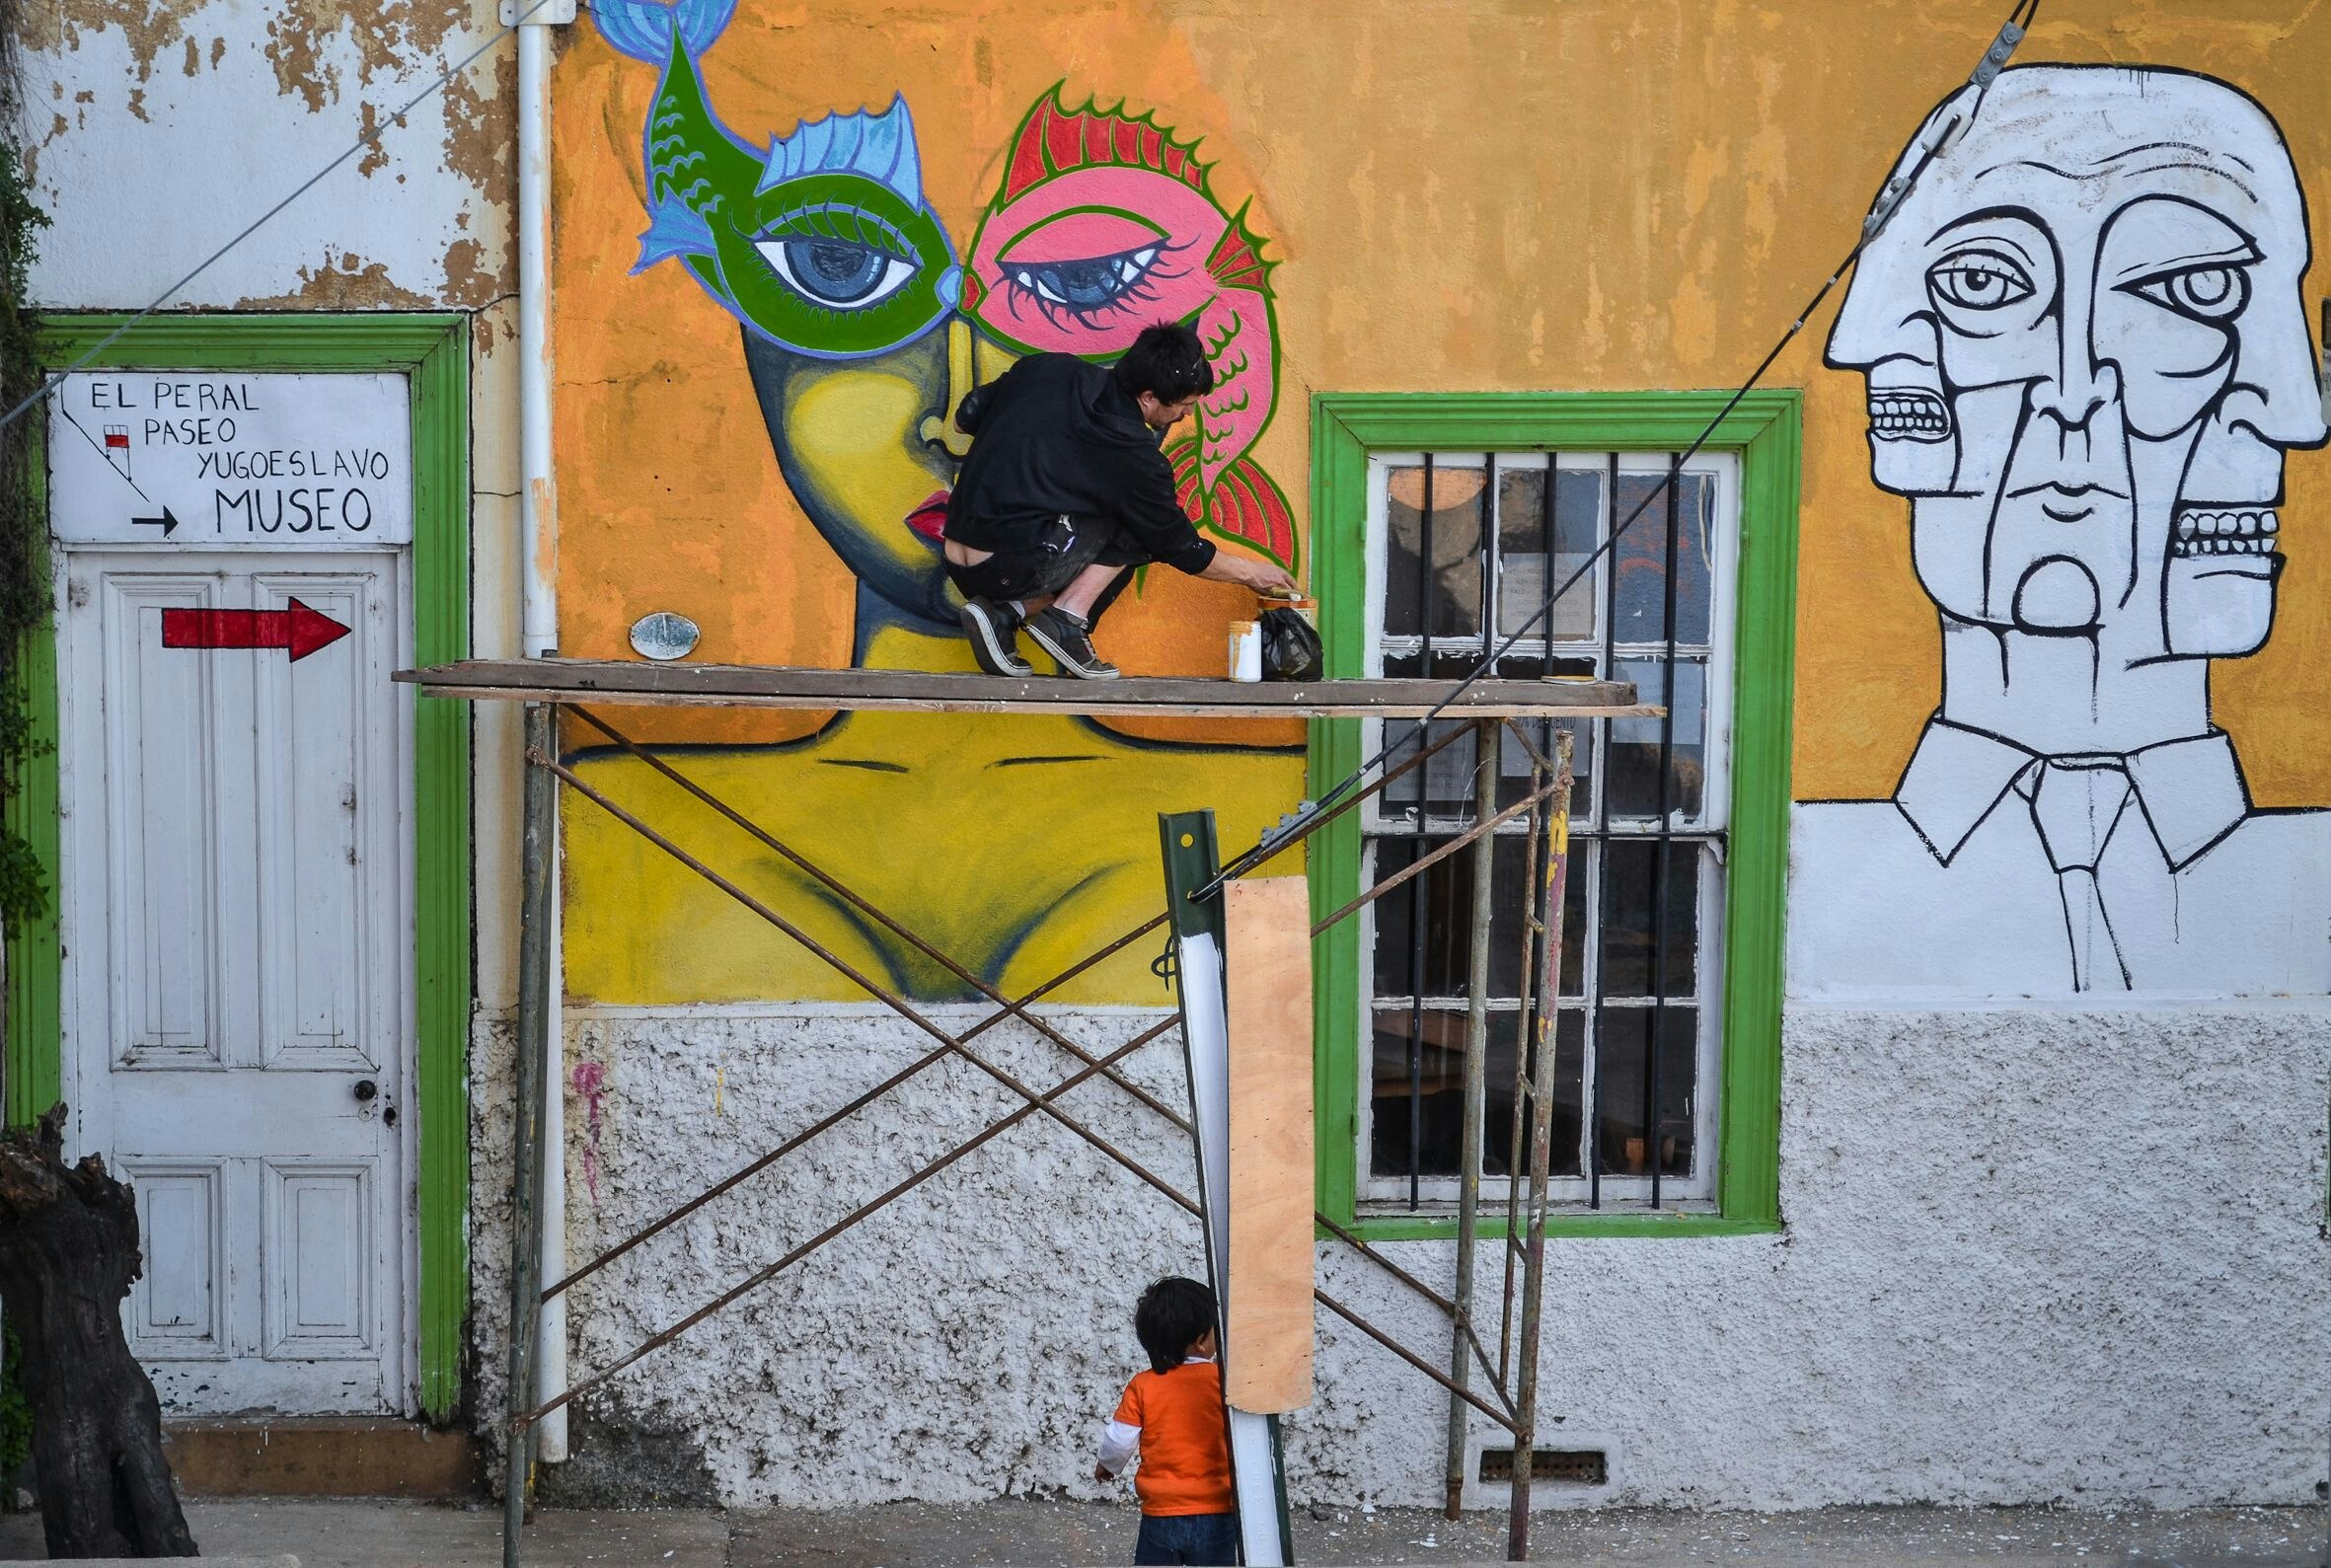 A street artist crouches on scaffolding painting a colourful mural on a building wall in Valparaiso, Chile, while a child watches.